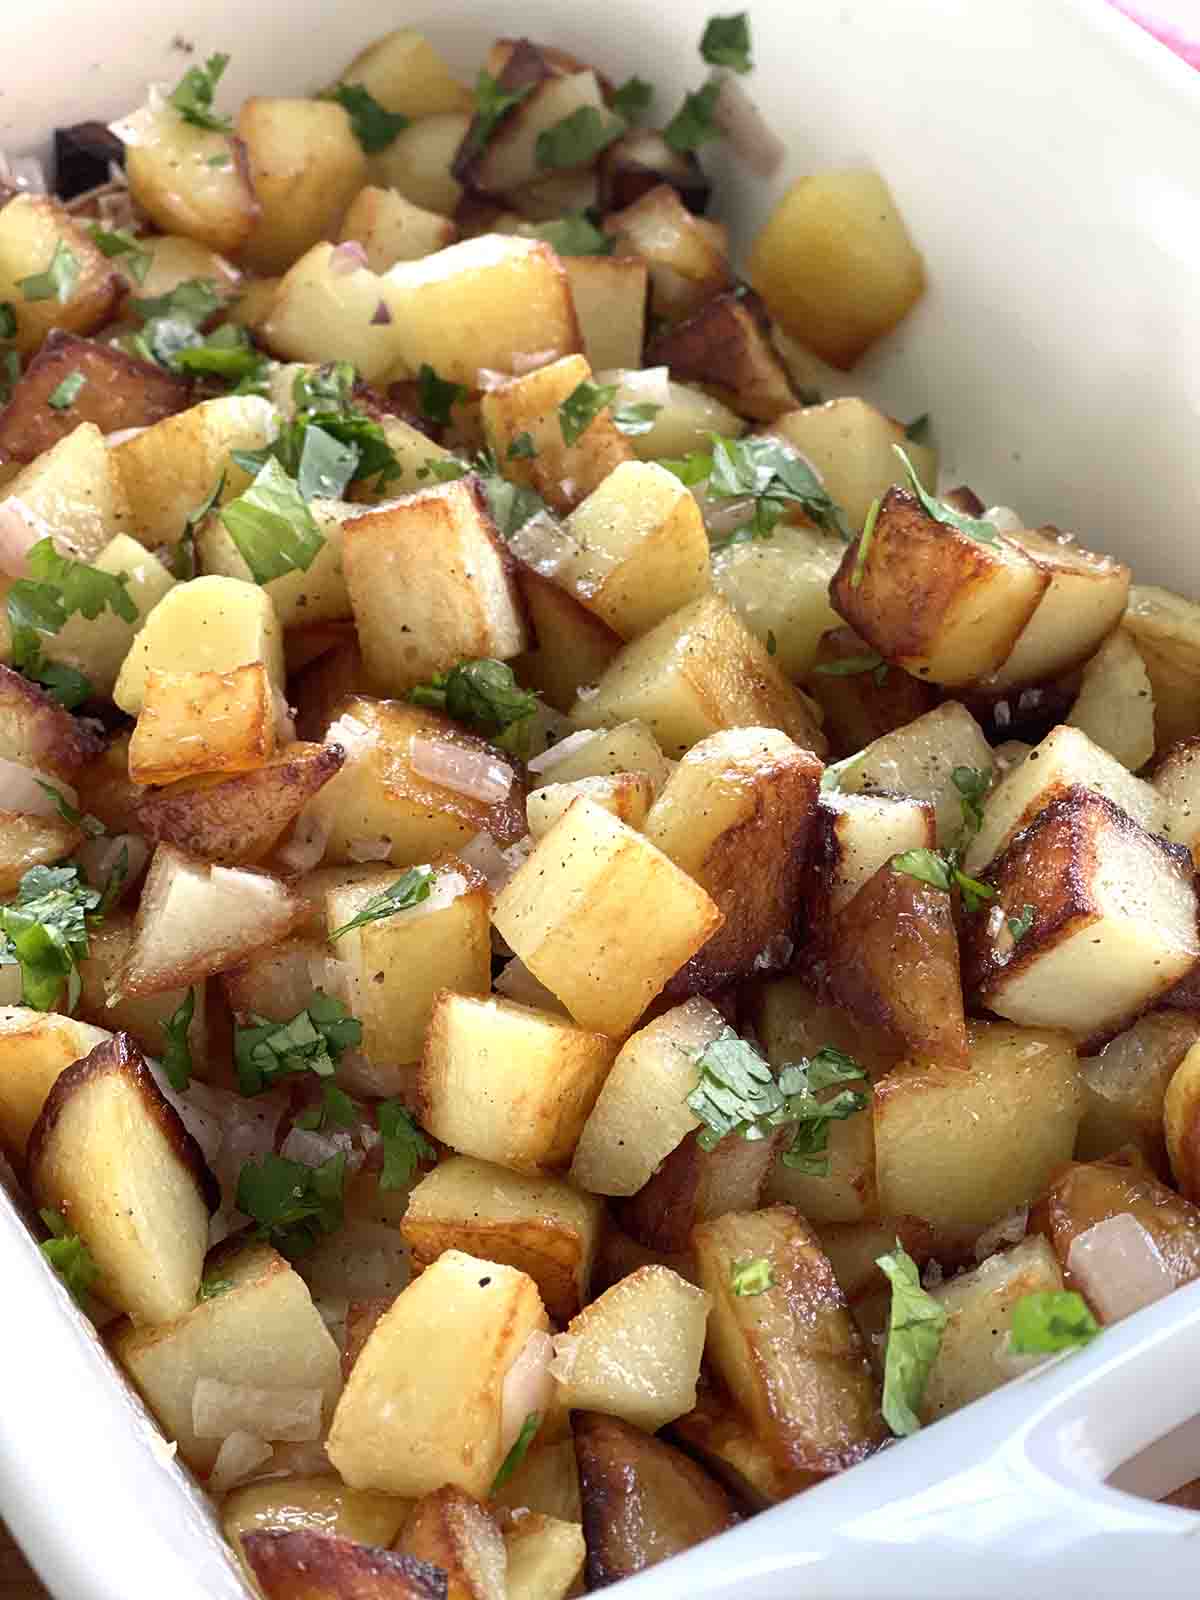 fried crispy cubed potatoes in a serving dish.